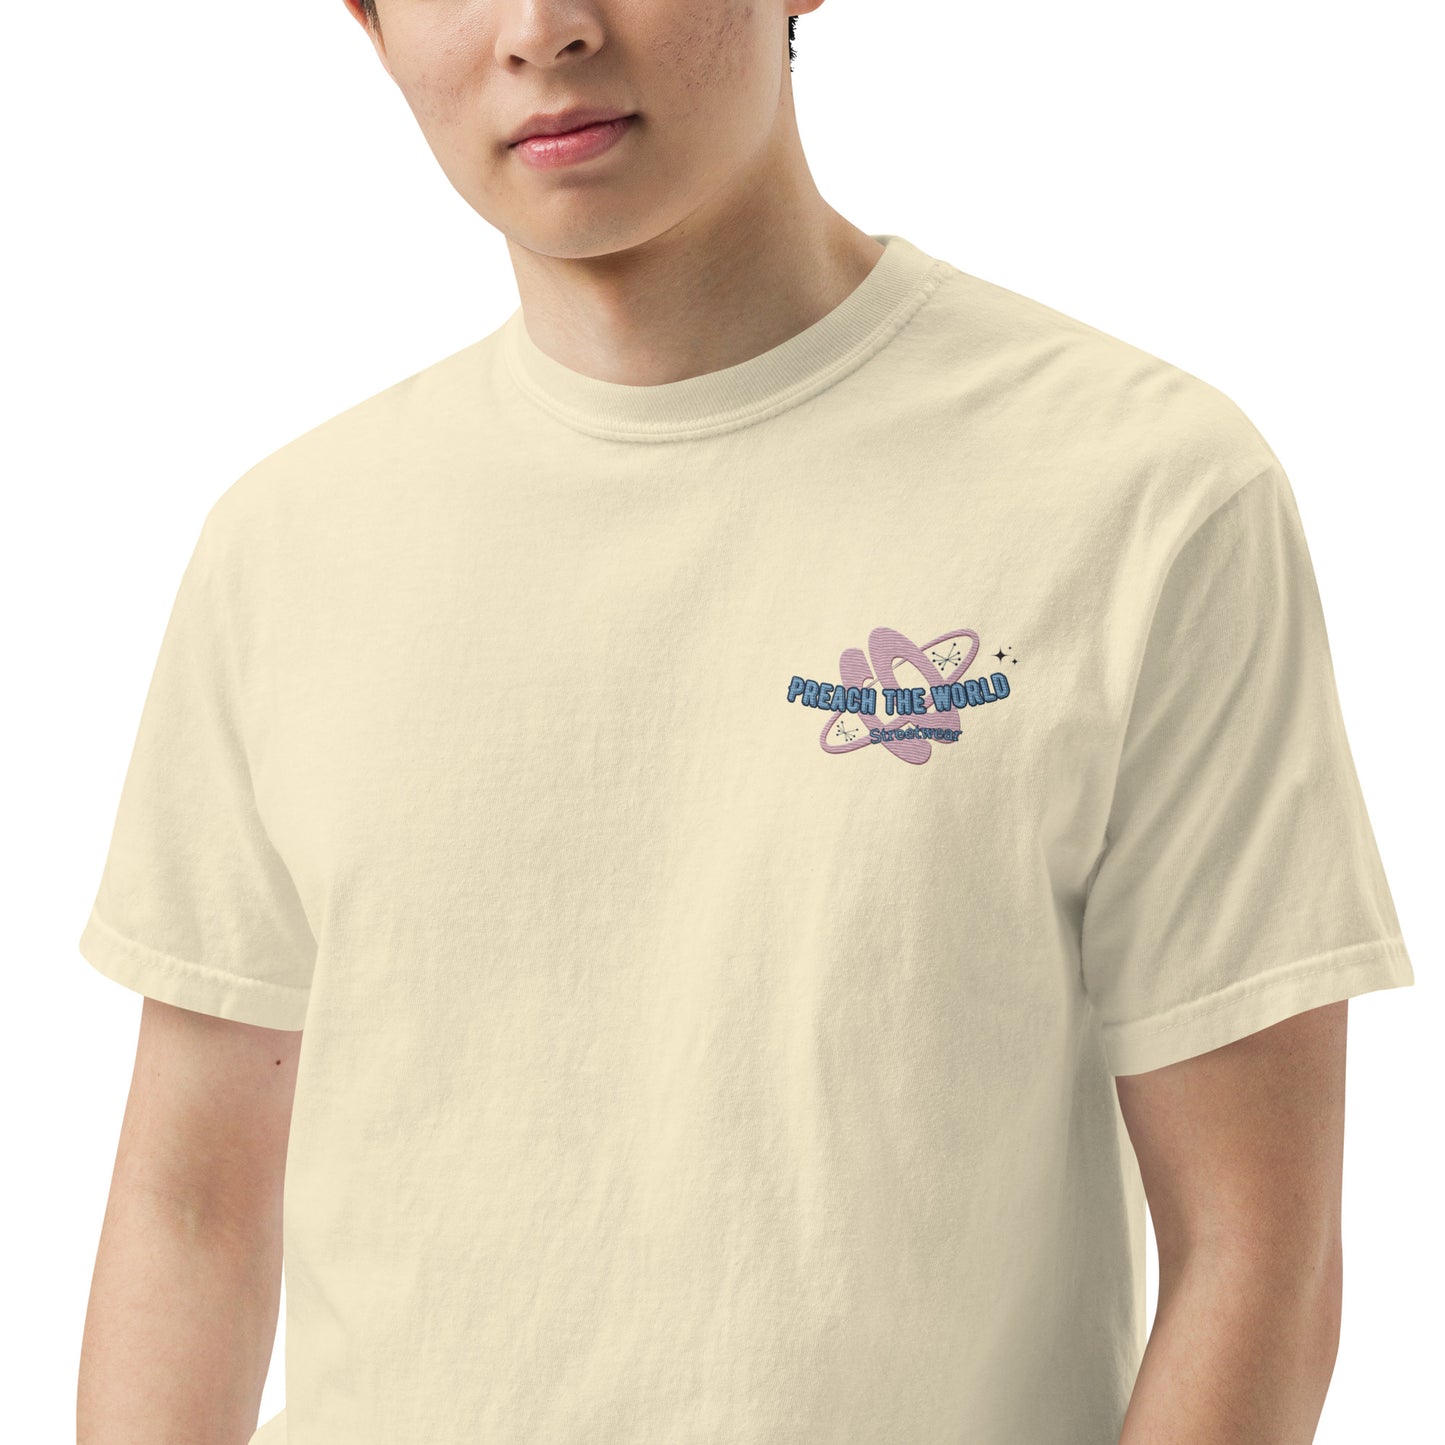 Preach The World embroidery Heavy Weight shirt